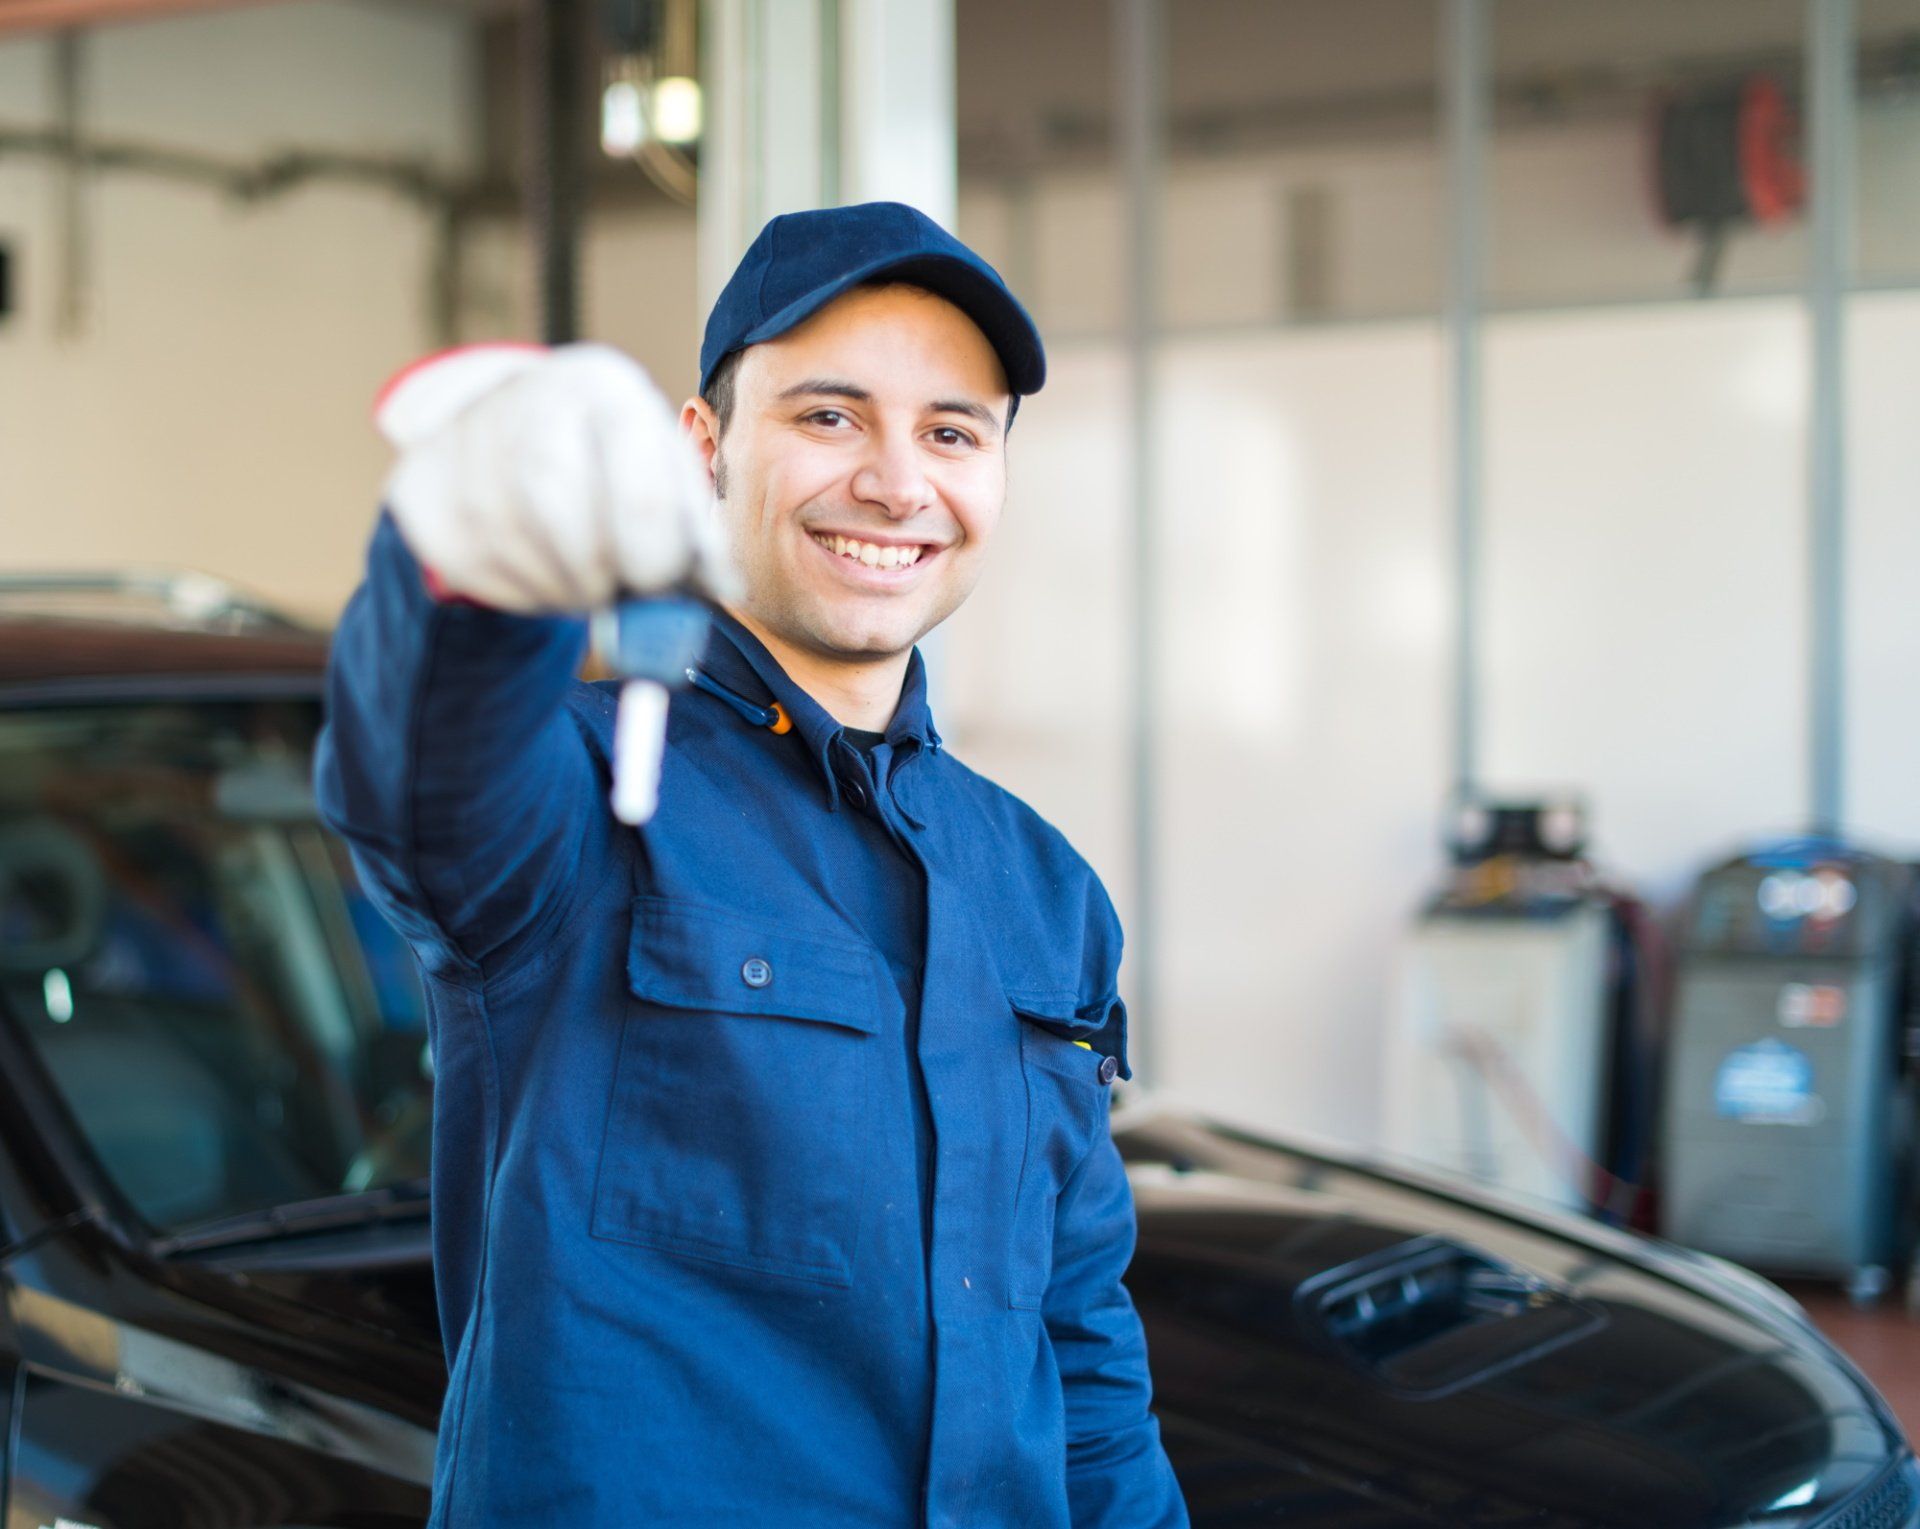 A mechanic is holding a car key in front of a car in a garage.